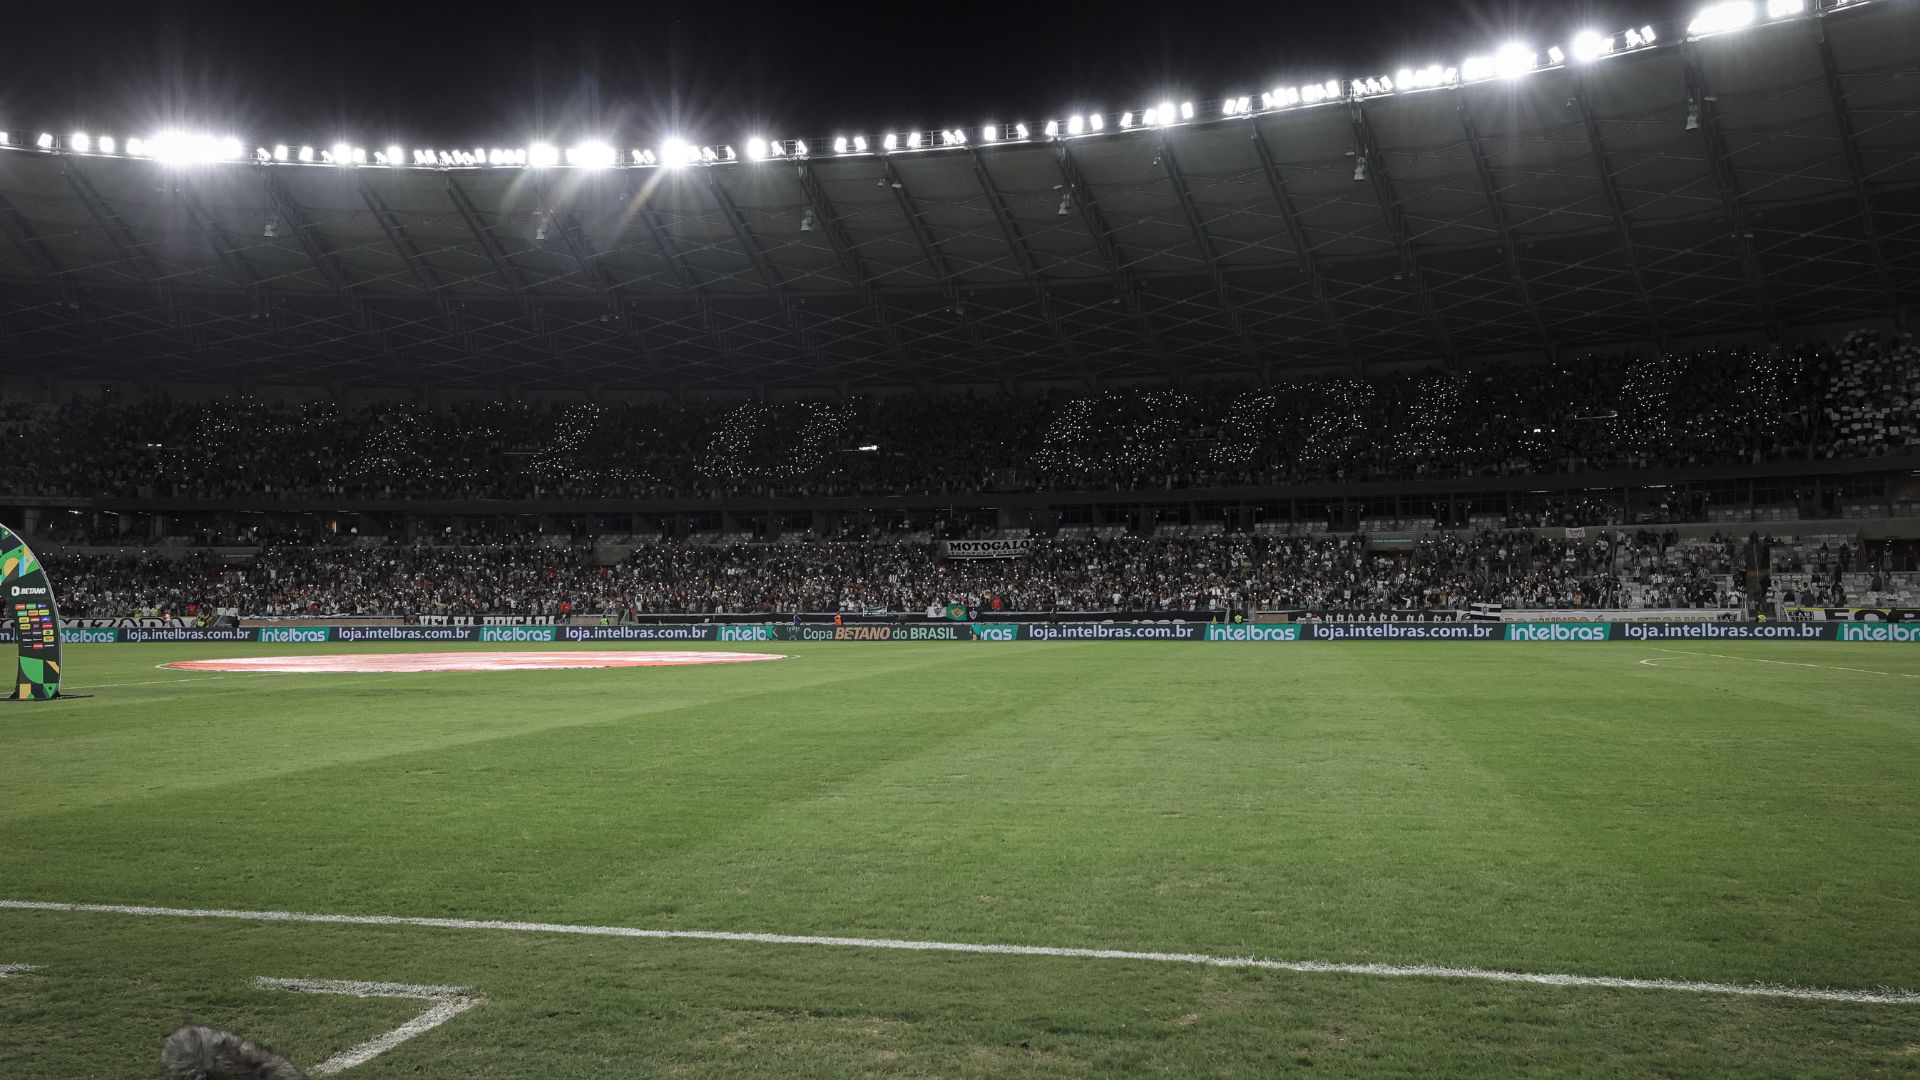 State of the Mineirão lawn, before the start of the match (Credit: Pedro Souza / Atlético)